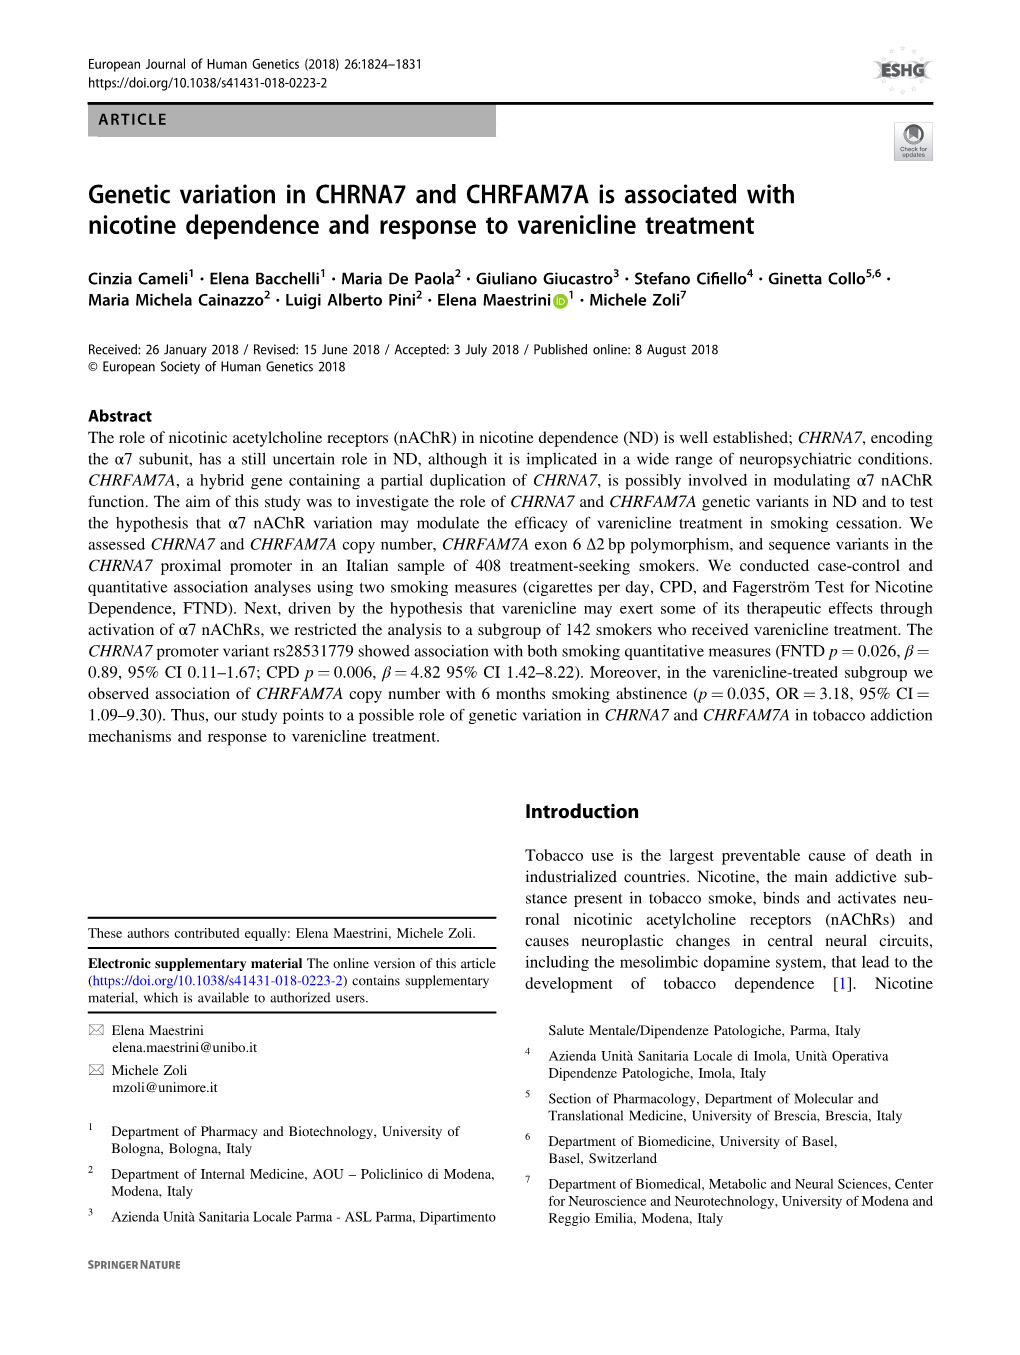 Genetic Variation in CHRNA7 and CHRFAM7A Is Associated with Nicotine Dependence and Response to Varenicline Treatment